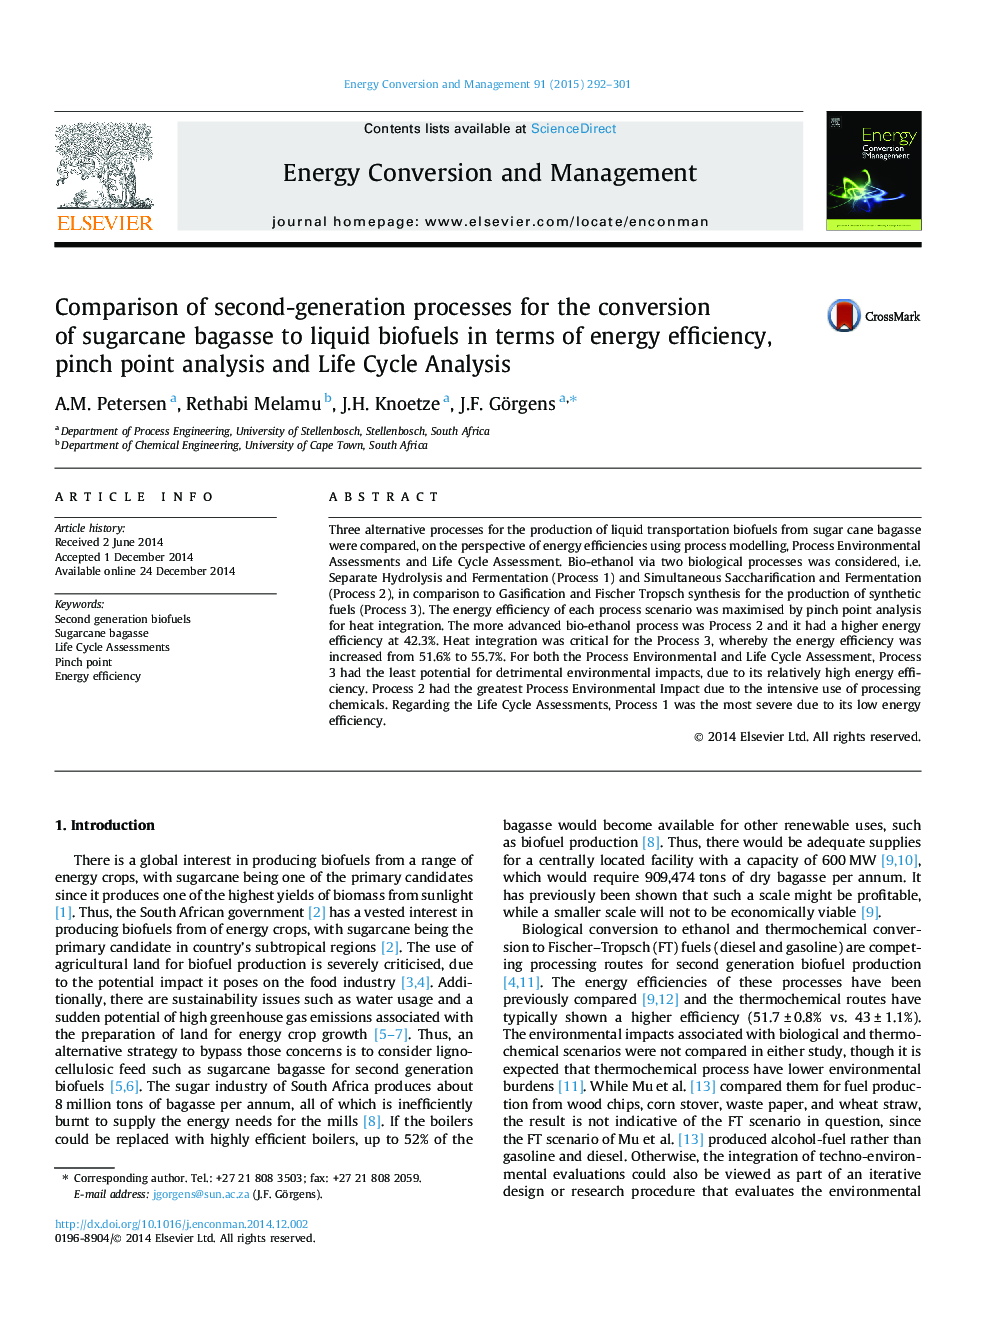 Comparison of second-generation processes for the conversion of sugarcane bagasse to liquid biofuels in terms of energy efficiency, pinch point analysis and Life Cycle Analysis